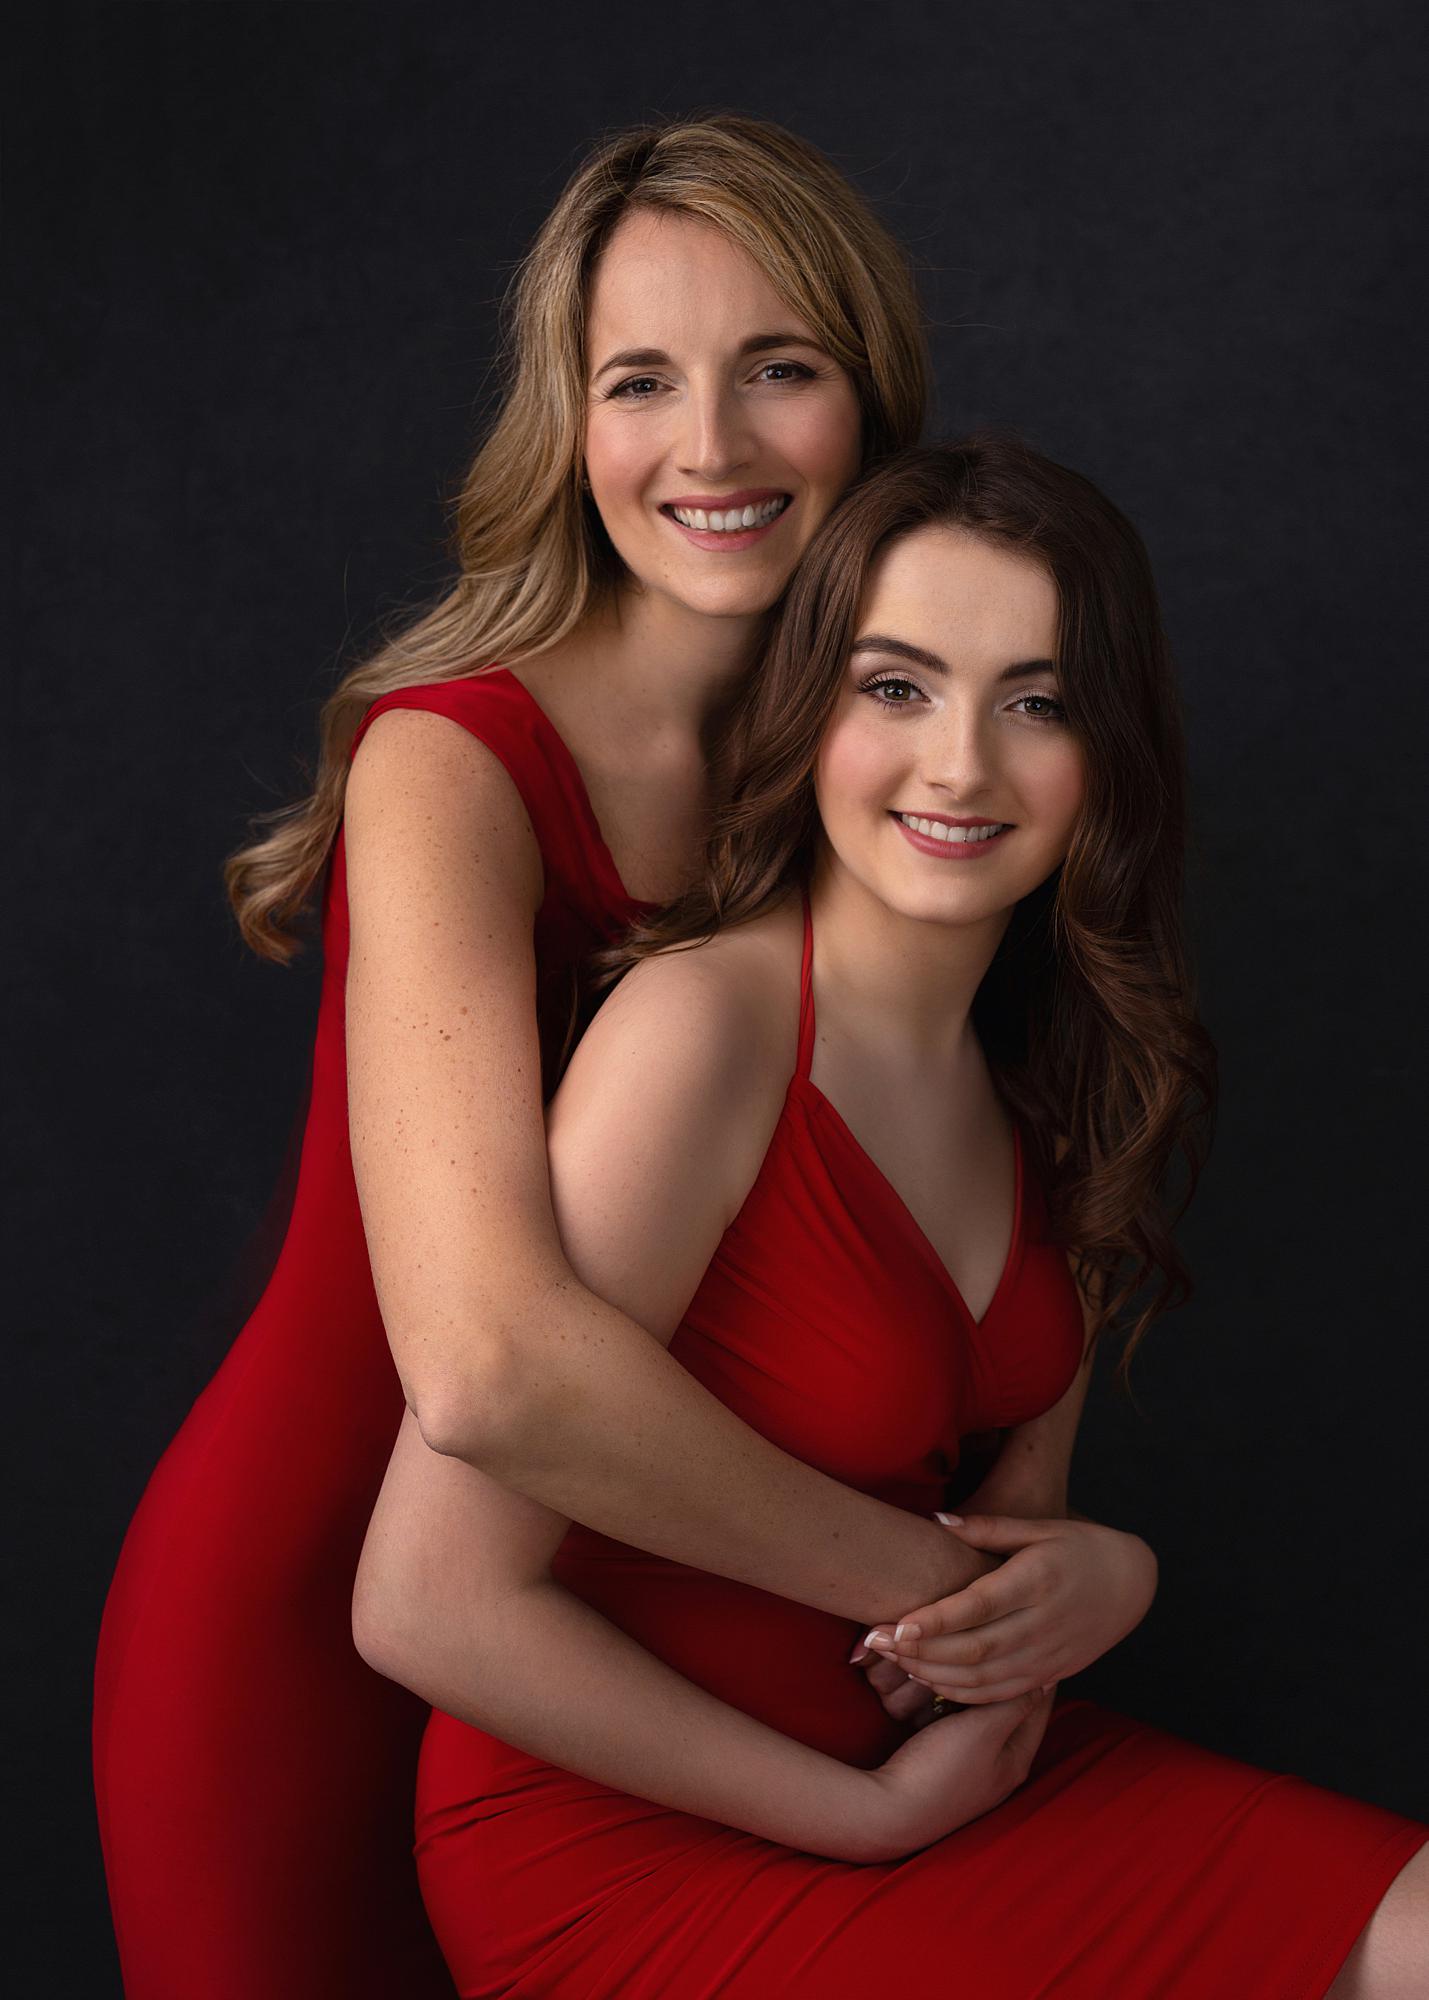 Mother and daughter pose for Beauty Shoot Photoshoot in a Suffolk studio wearing red dresses